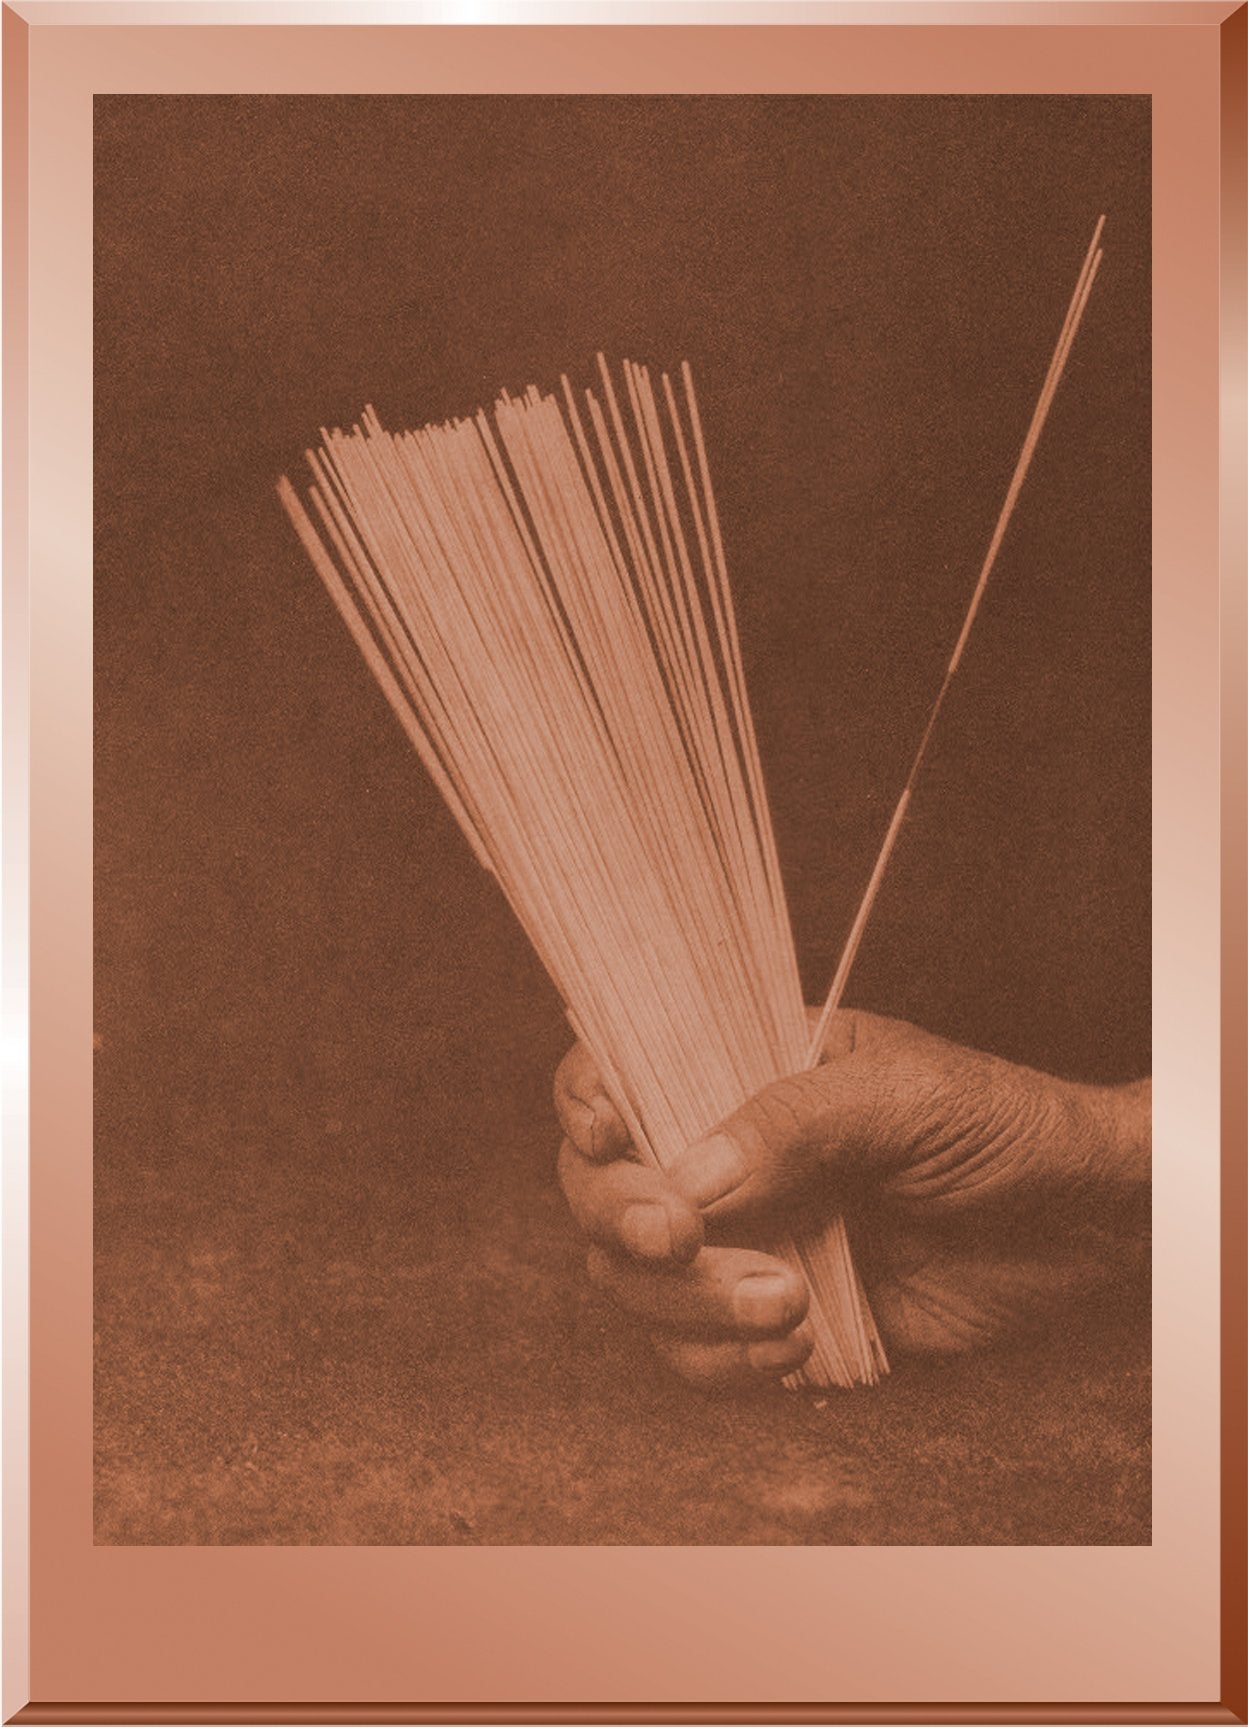 Sticks Used in Hupa Guessing Game